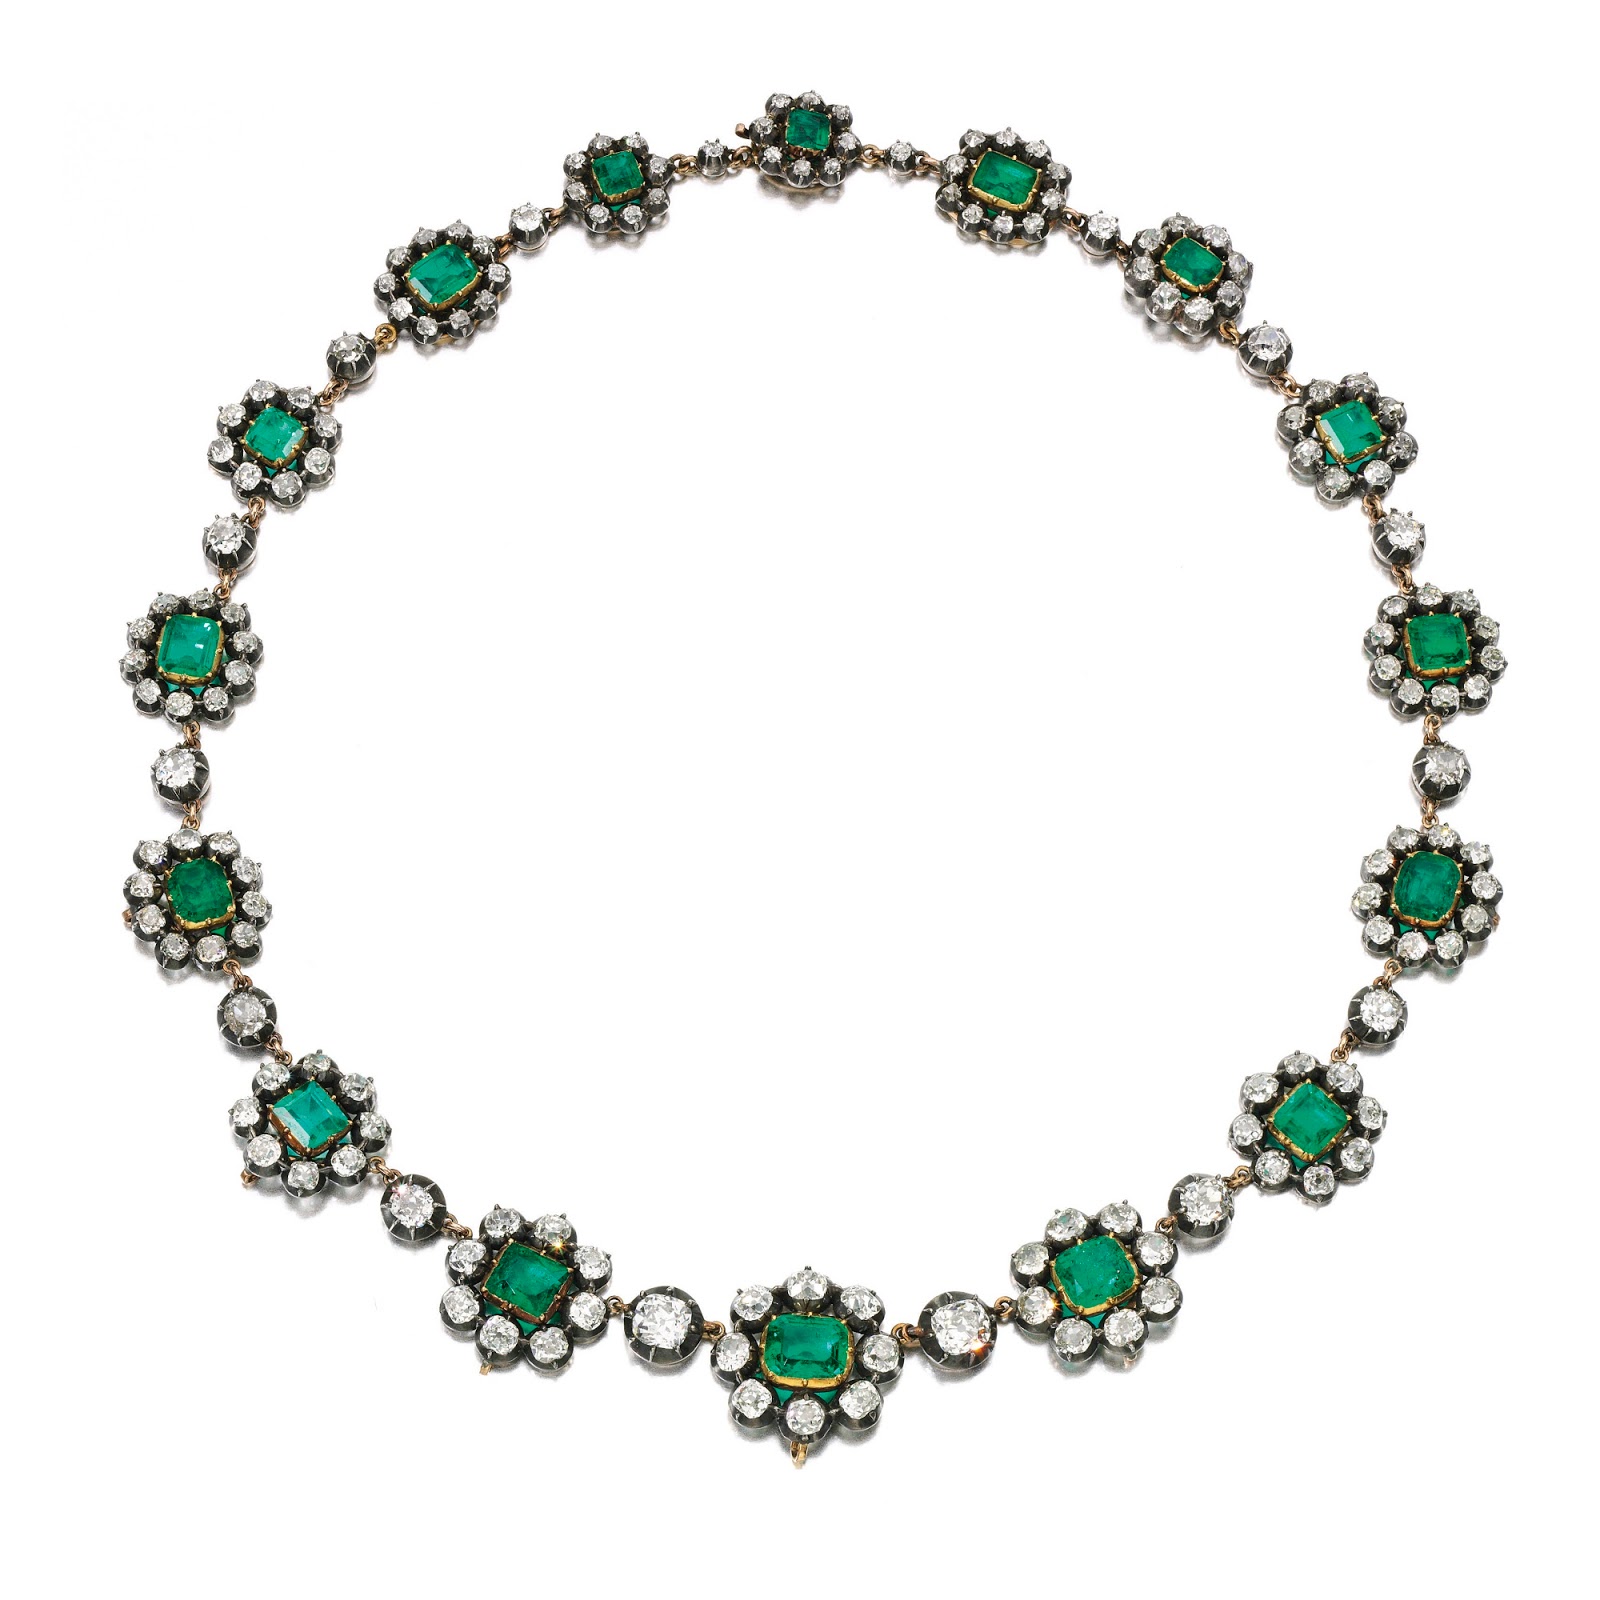 Marie Poutine's Jewels & Royals: Elegant Green Necklaces III